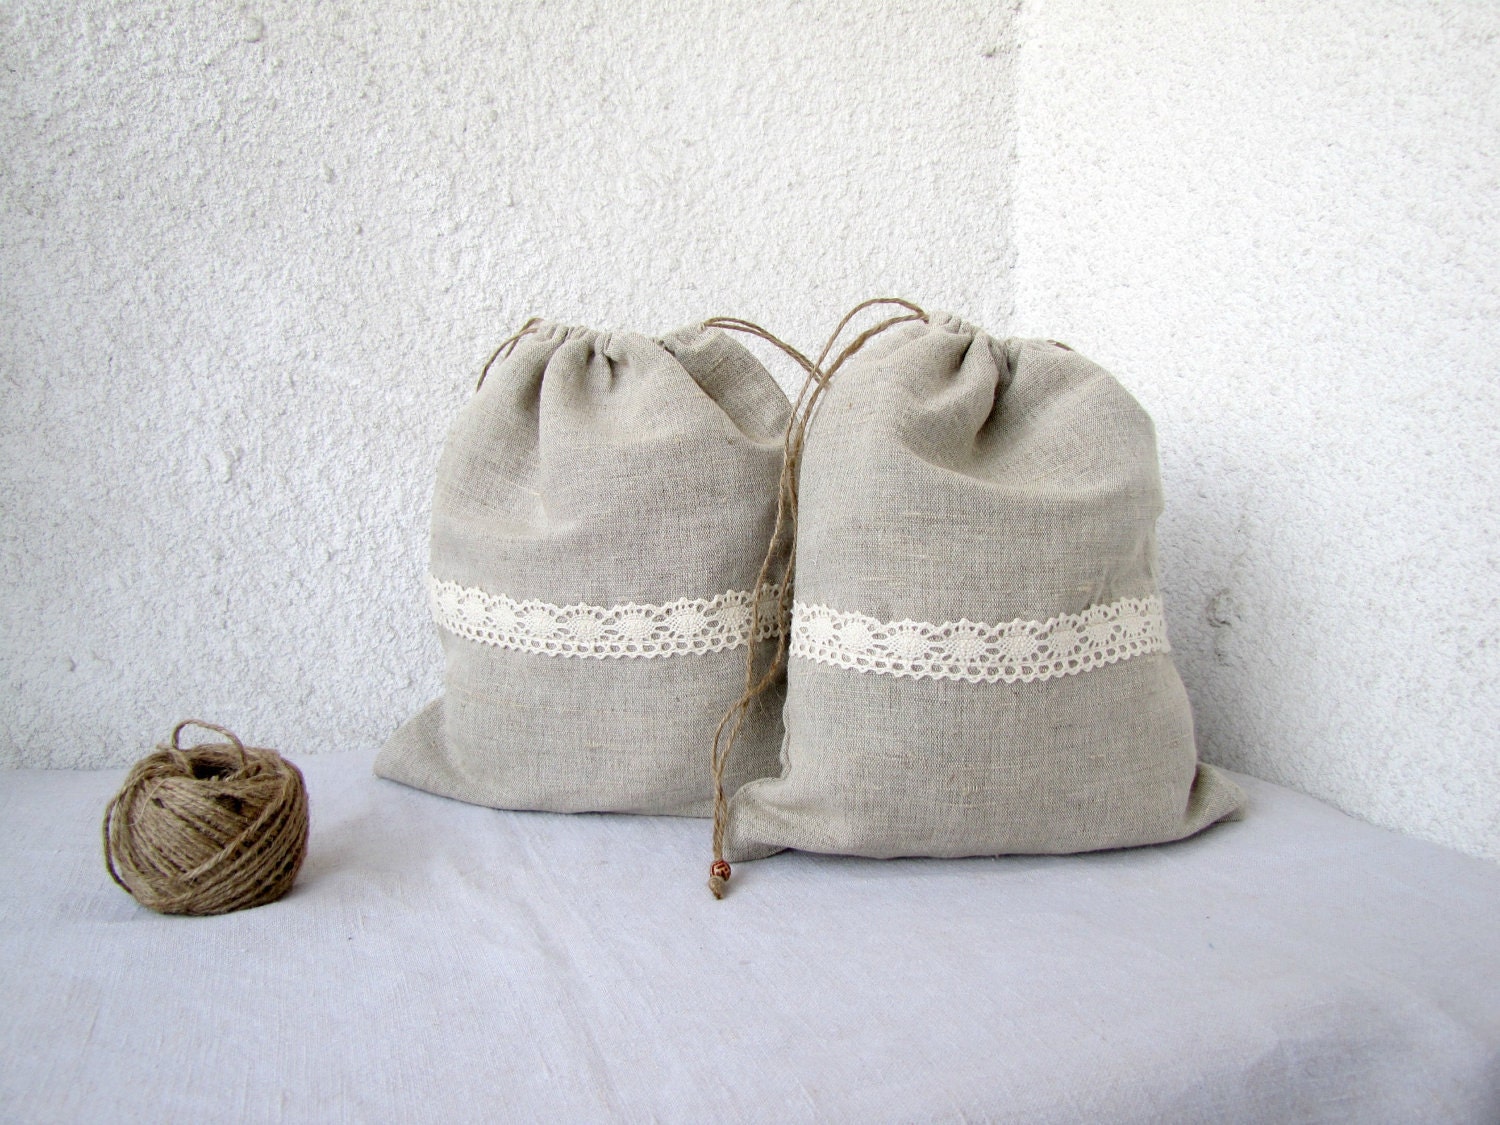 2 Linen and lace Drawstring bags, gift bag, reusable, eco friendly